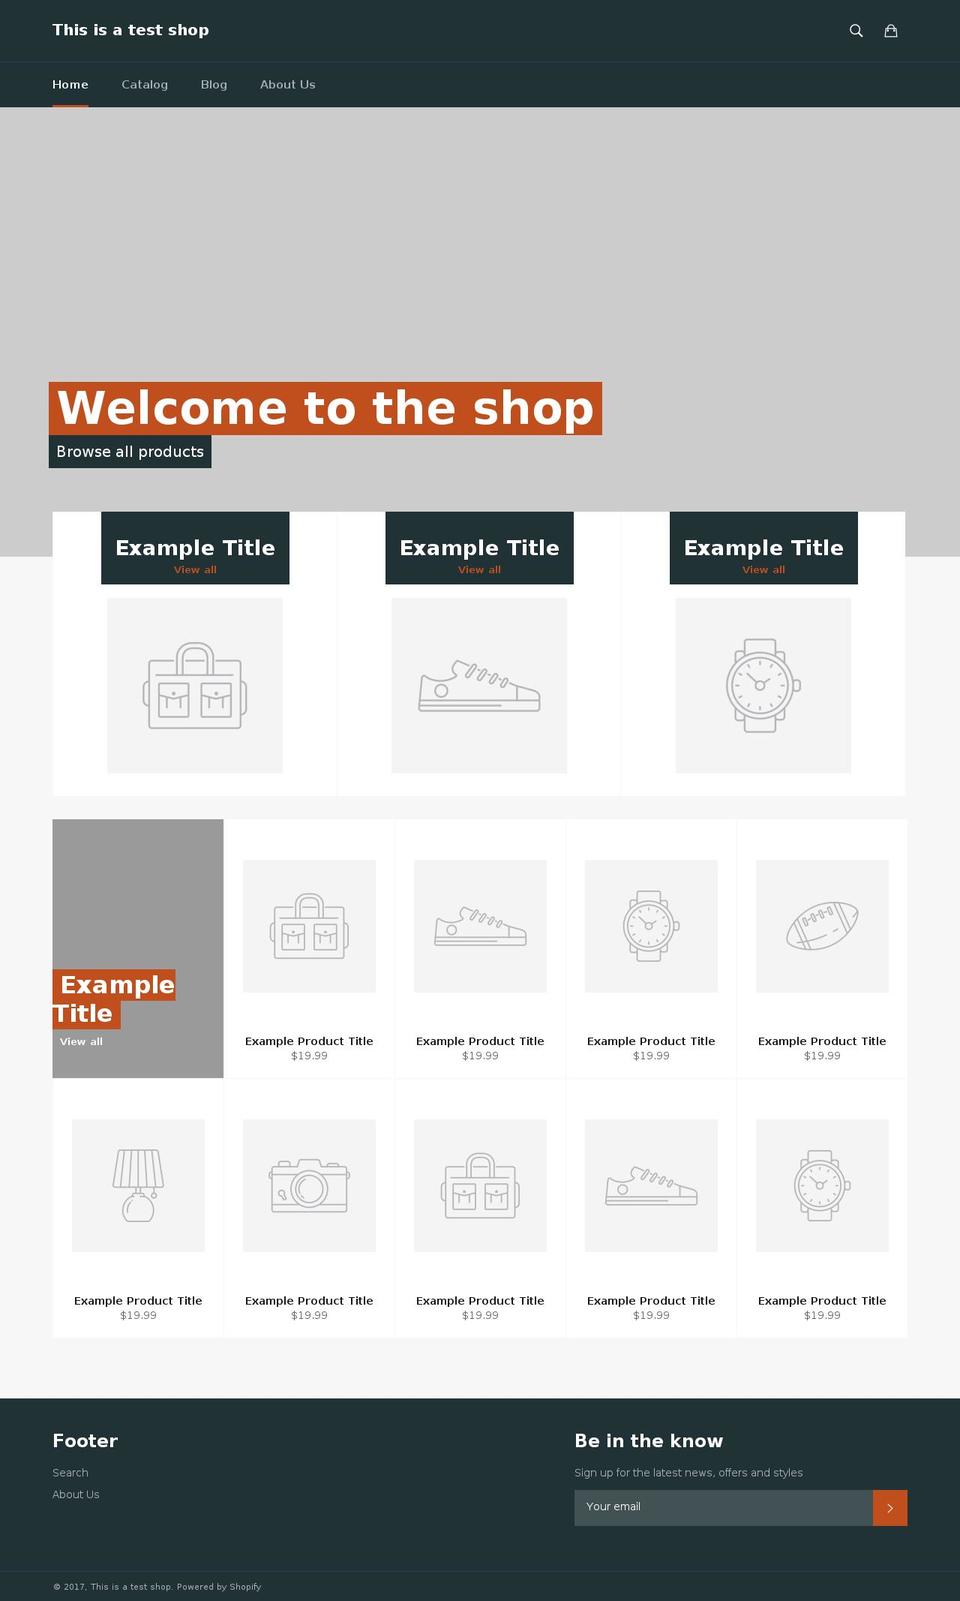 Venture Shopify theme site example this-is-a-test-shop-2.myshopify.com